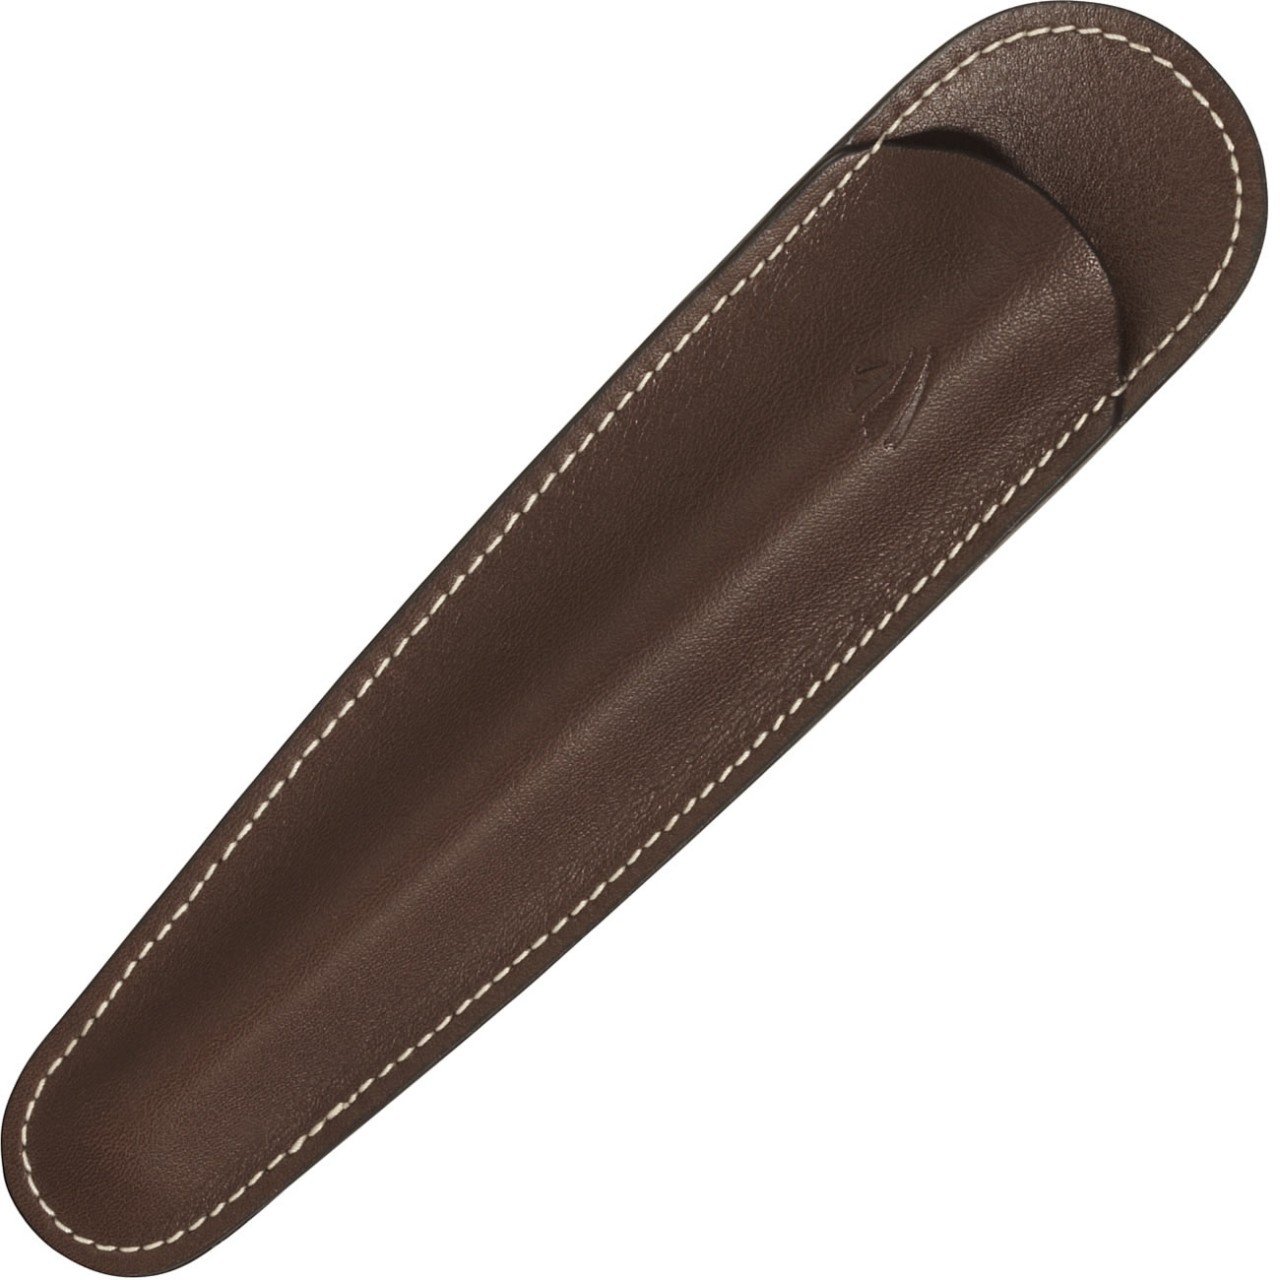 LARGE SOFT PEN POUCH * RIVIERA CHOCOLATE